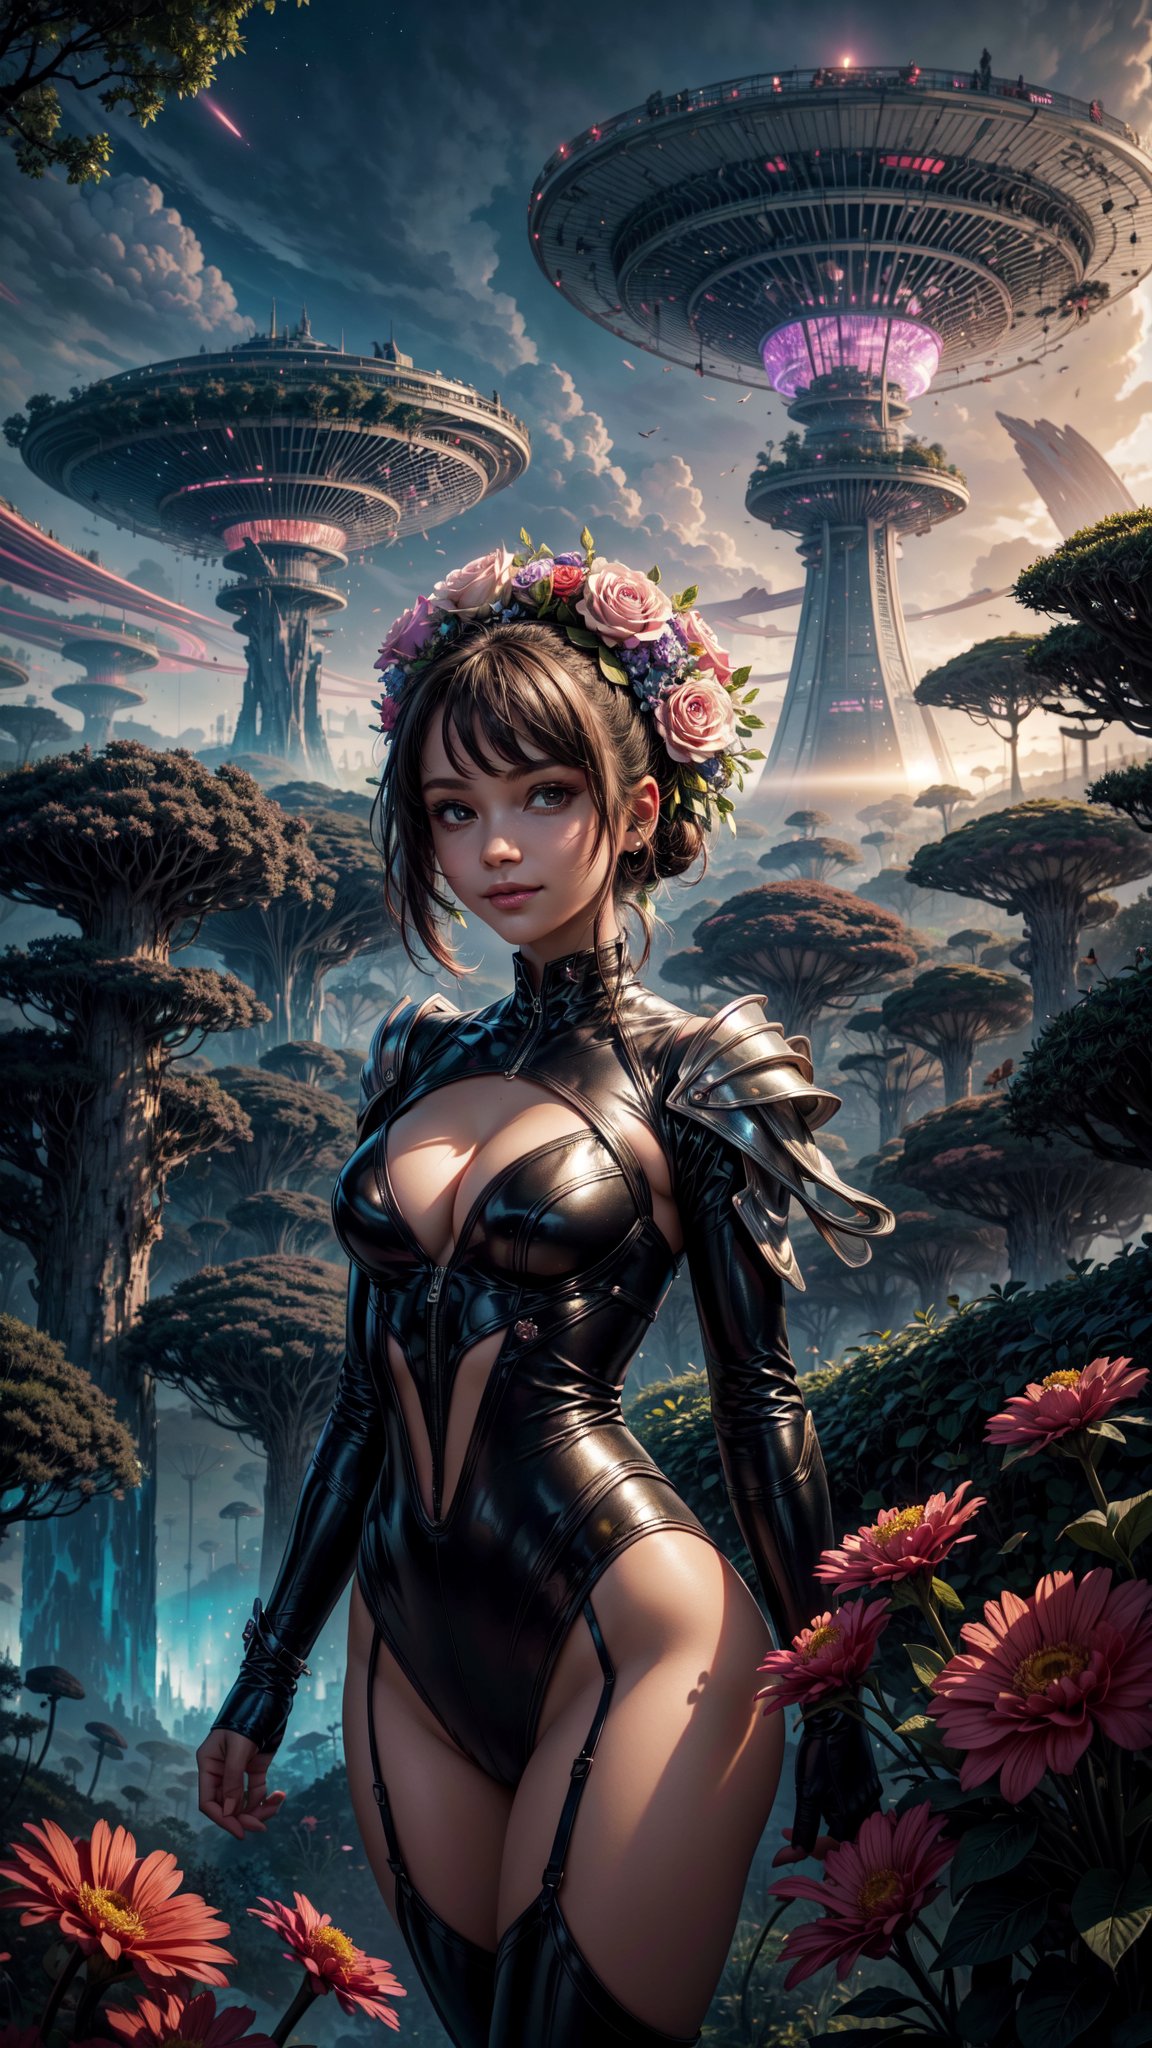 A curious girl with a bouquet of vibrant flowers stands at the edge of a fantastical landscape, surrounded by towering mushrooms and twisted trees. In the background, a glowing alien cityscape stretches towards the sky, bathed in an ethereal multicolored light that casts an otherworldly glow on the scene. The girl's bright smile and outstretched arms seem to welcome the extraterrestrial visitors, as if showcasing her own little patch of wonder amidst this surreal science fiction world. Her bouquet of flowers adds a pop of color to the dreamlike atmosphere, while the cityscape in the distance creates a sense of depth and mystery.